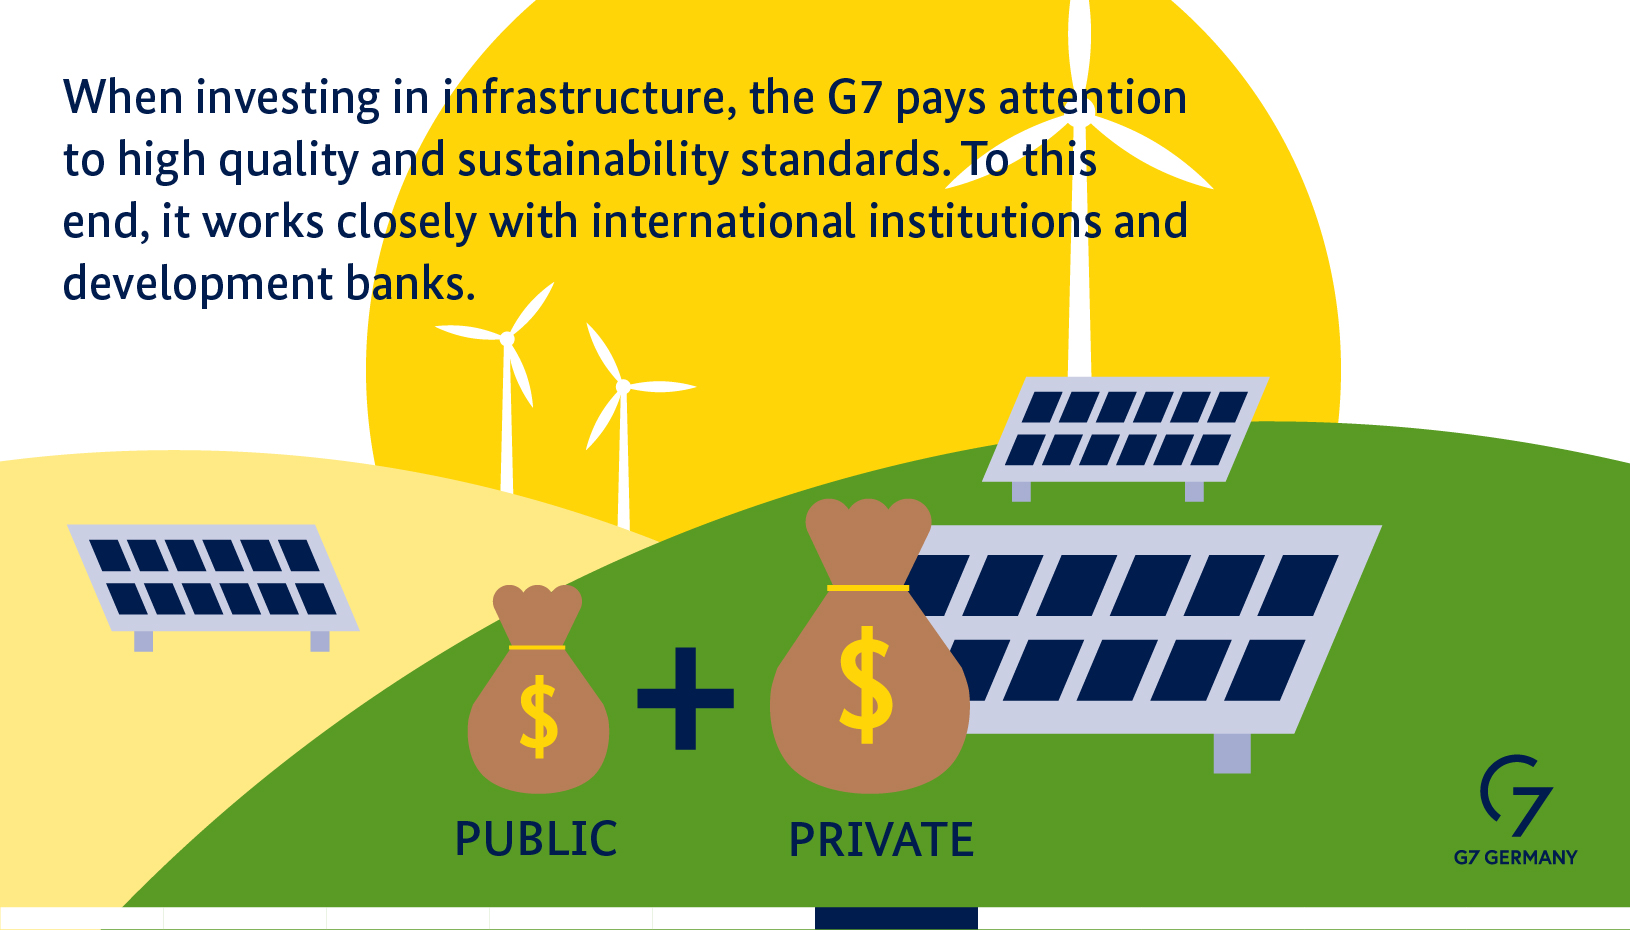 When investing in infrastructure, the G7 pays attention to high quality and sustainability standards. To this end, they work closely with international institutions and development banks.